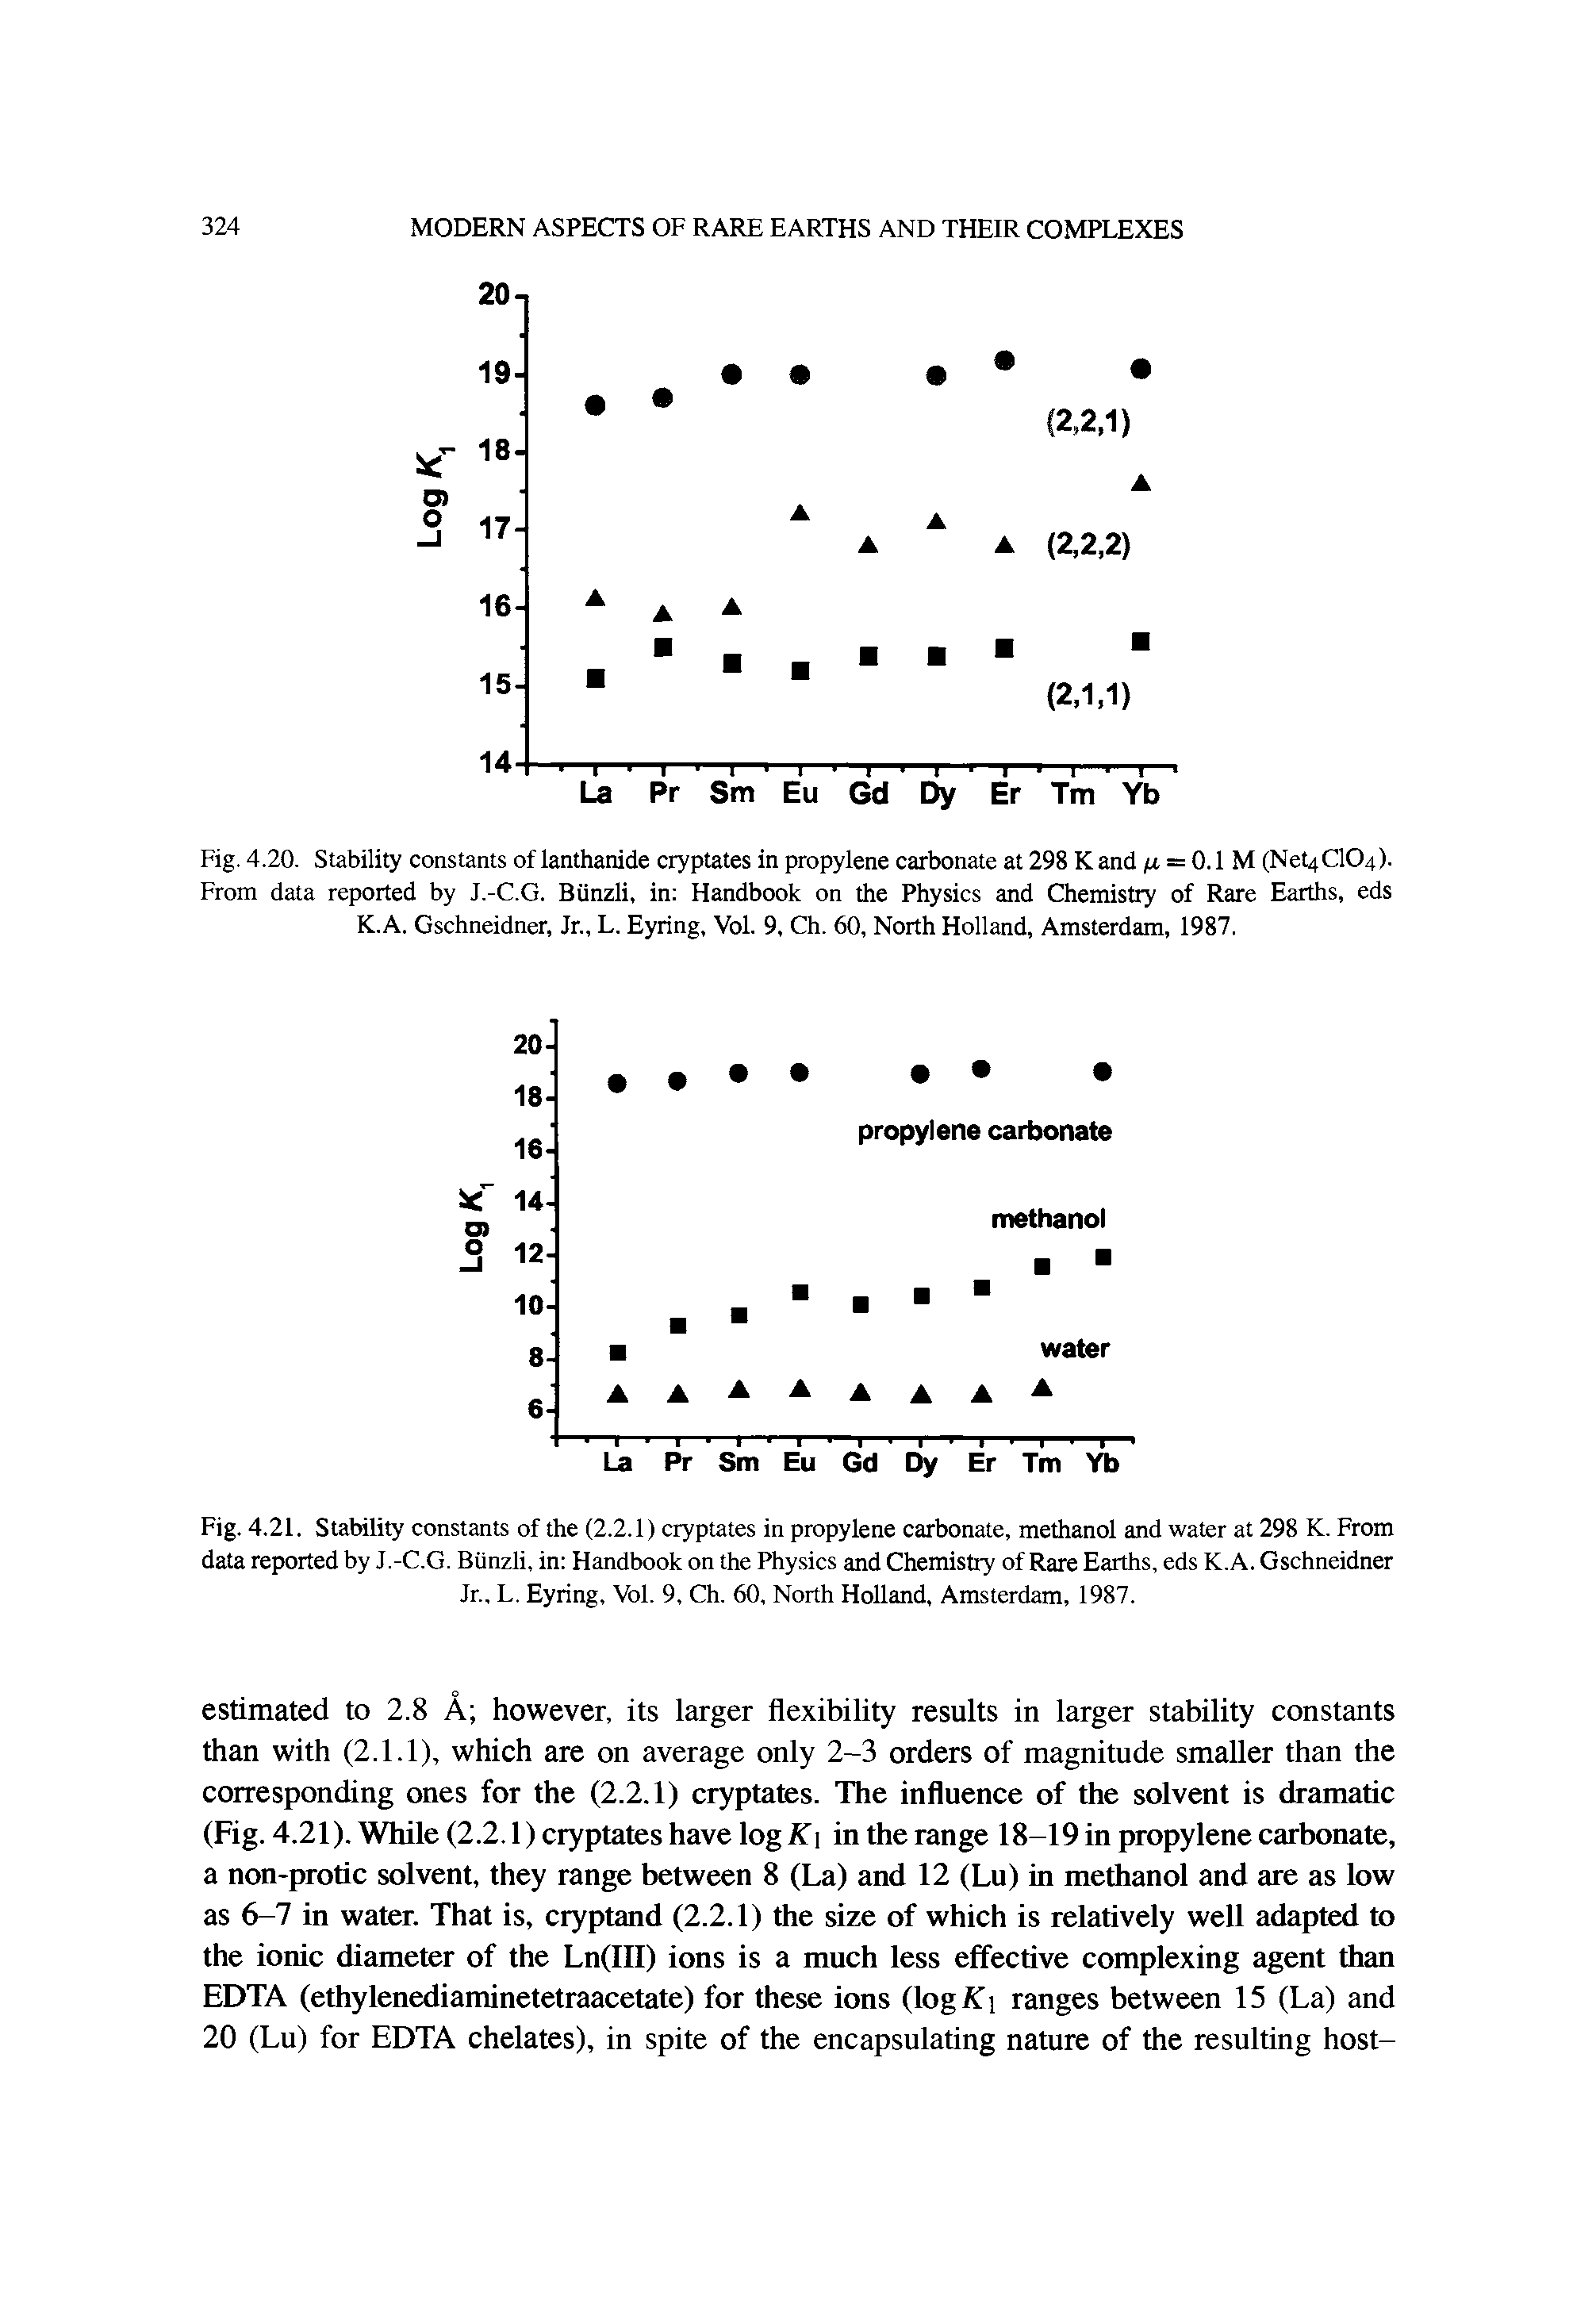 Fig. 4.21. Stability constants of the (2.2.1) cryptates in propylene carbonate, methanol and water at 298 K. From data reported by J.-C.G. Biinzli, in Handbook on the Physics and Chemistry of Rare Earths, eds K.A. Gschneidner Jr., L. Eyring, Vol. 9, Ch. 60, North Holland, Amsterdam, 1987.